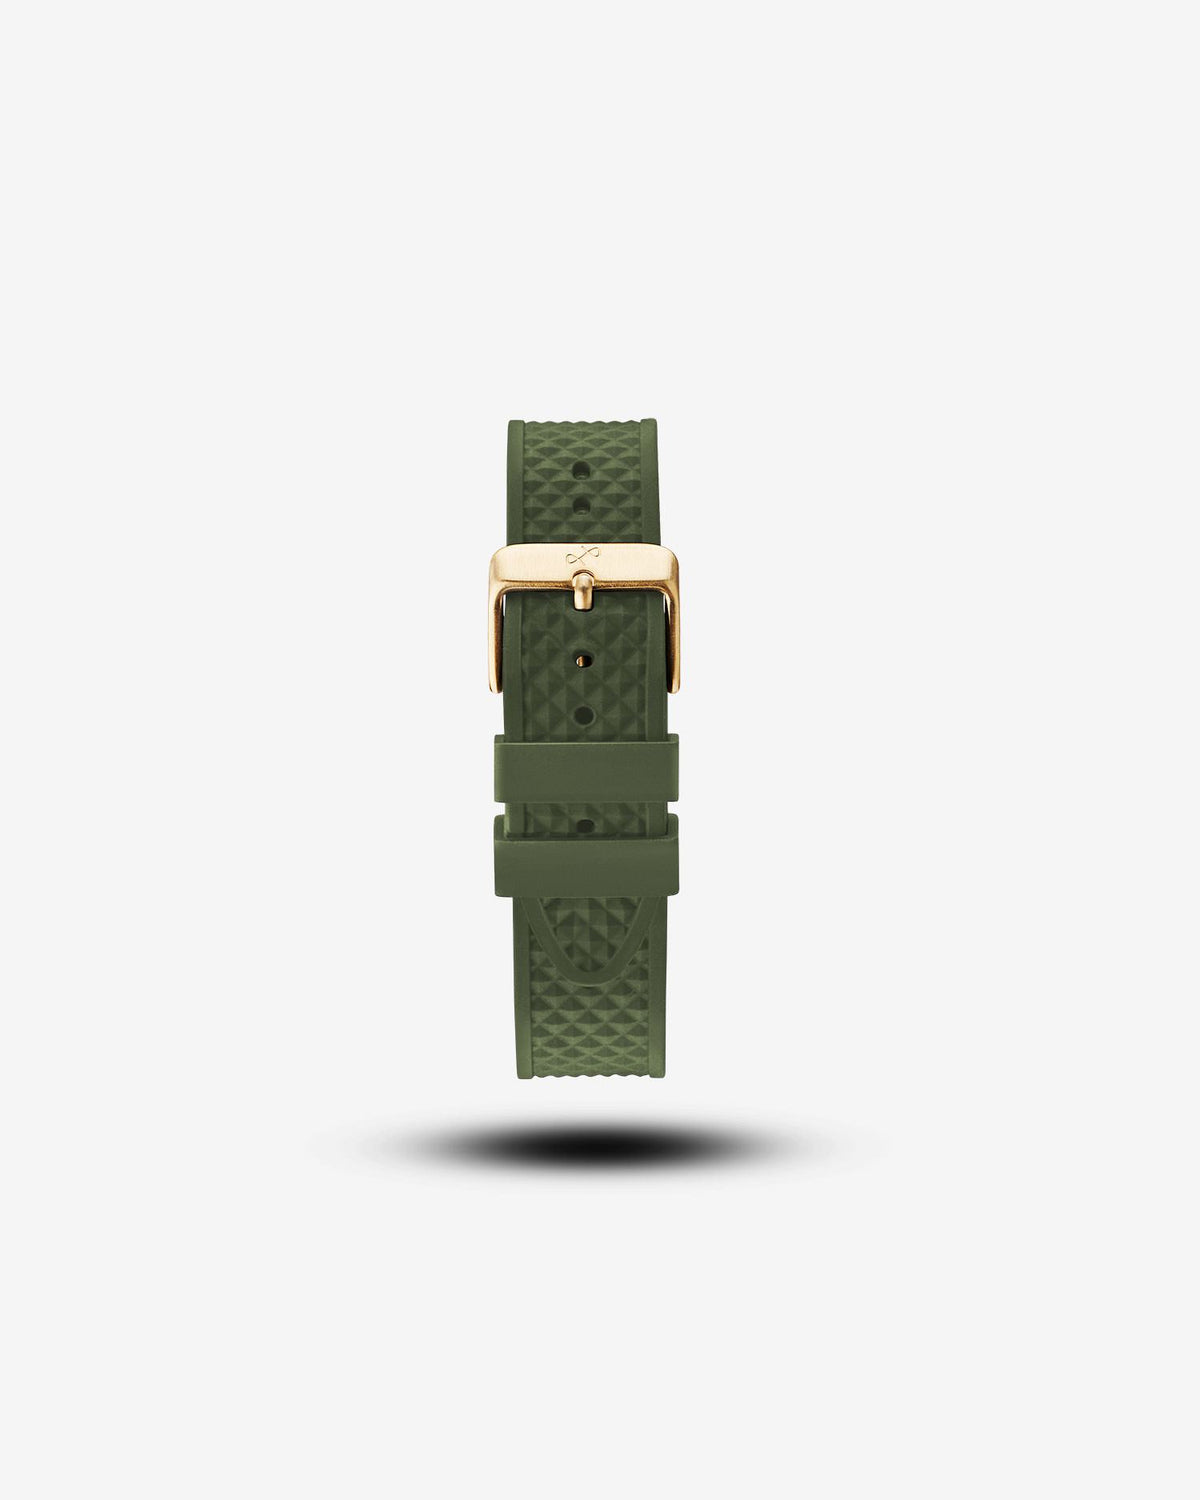 About Vintage - Pin Buckle - Green Silicone #Buckle Color_Gold